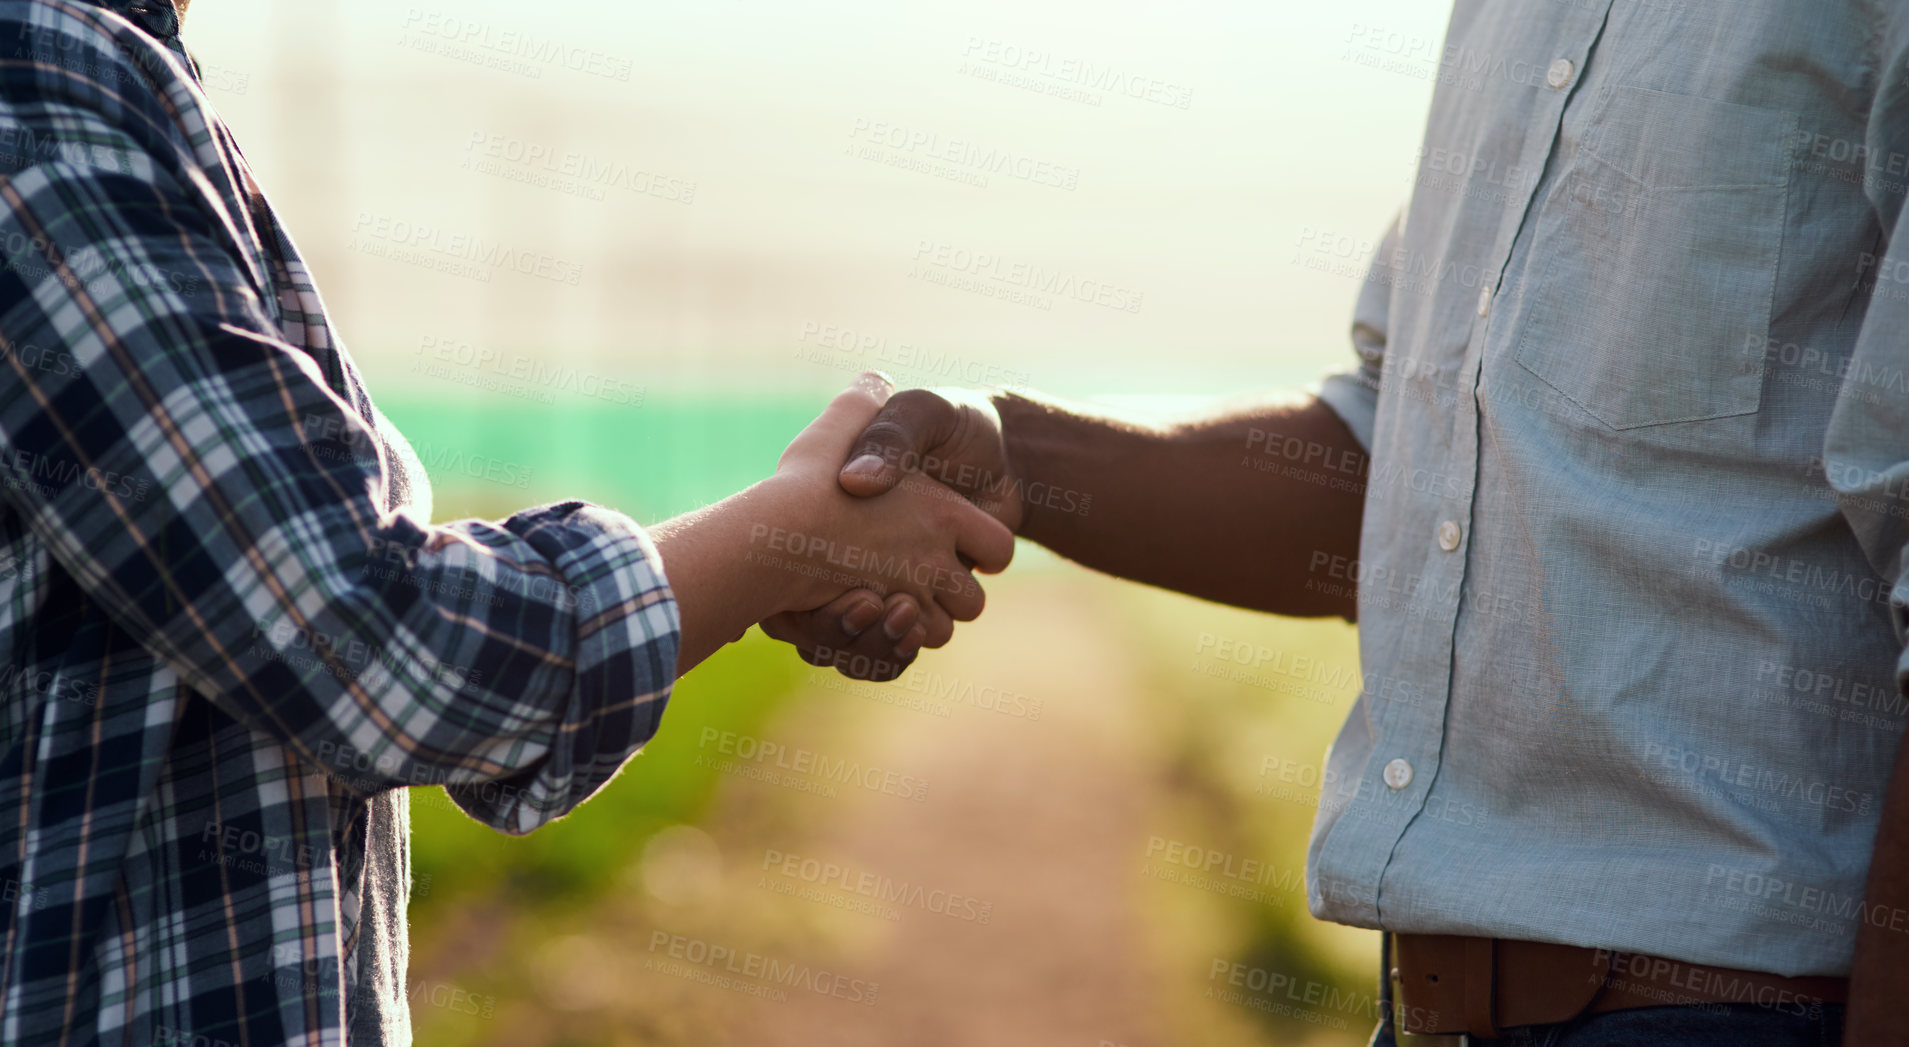 Buy stock photo Partnership, teamwork and unity by handshake, two farmers starting organic trade together. Sustainable farm owners meeting, greeting, entering a business deal. Men collaborating with a goal or vision